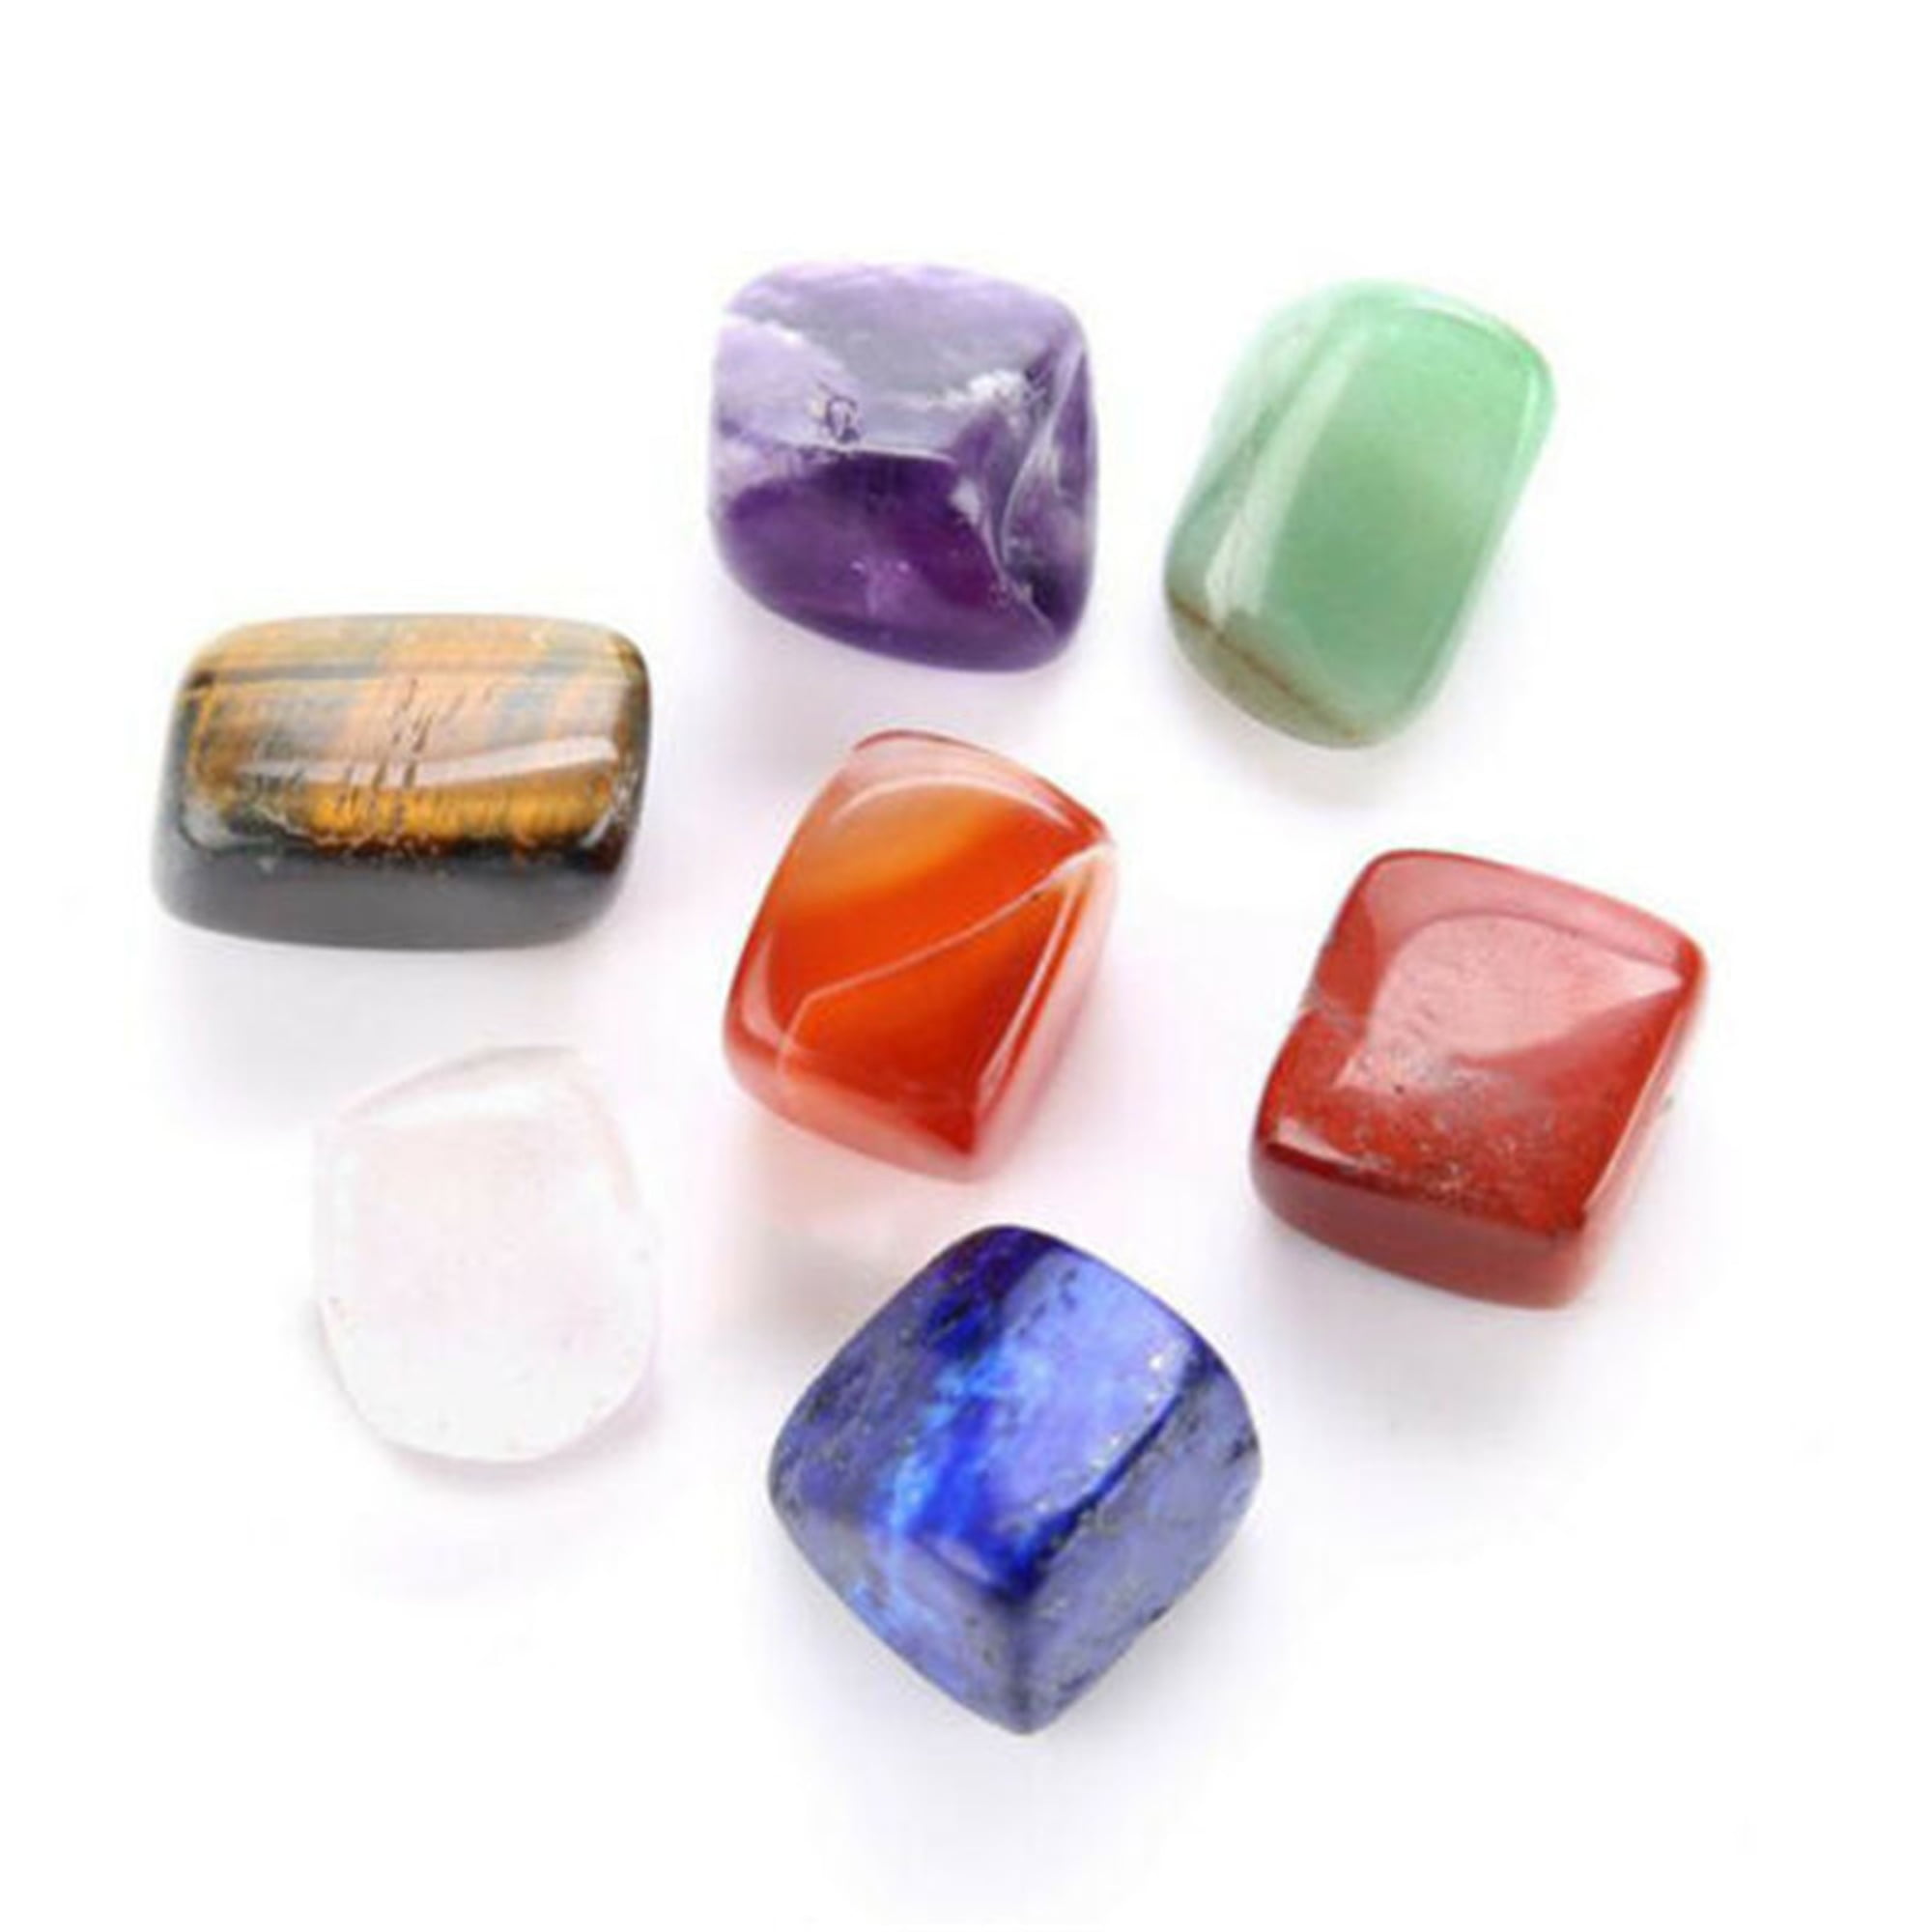 Details about   Set of 15 Healing Crystal Natural Gemstone Reiki Chakra Collection Stone Gift US 